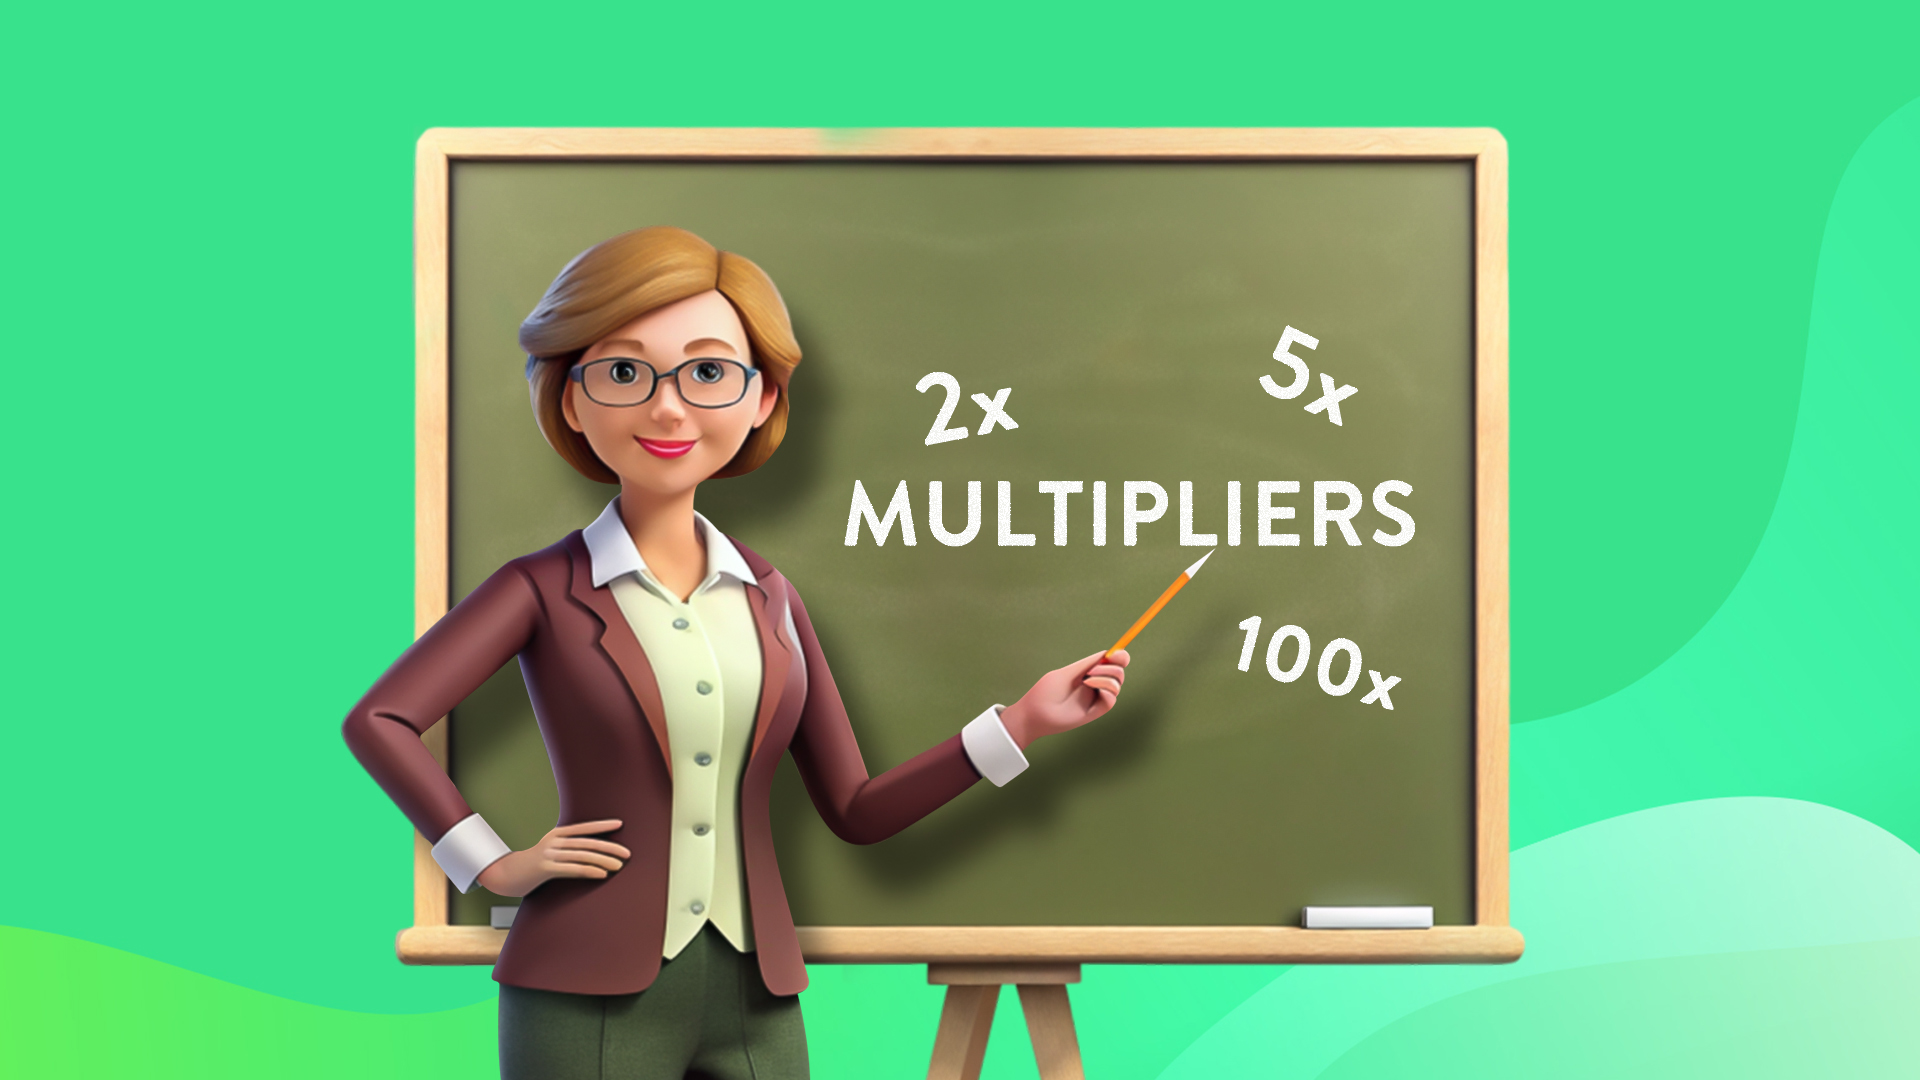 On a mint-green background is a teacher pointing to a blackboard that says ‘Multipliers’ surrounded by 2x, 5x, and 100x